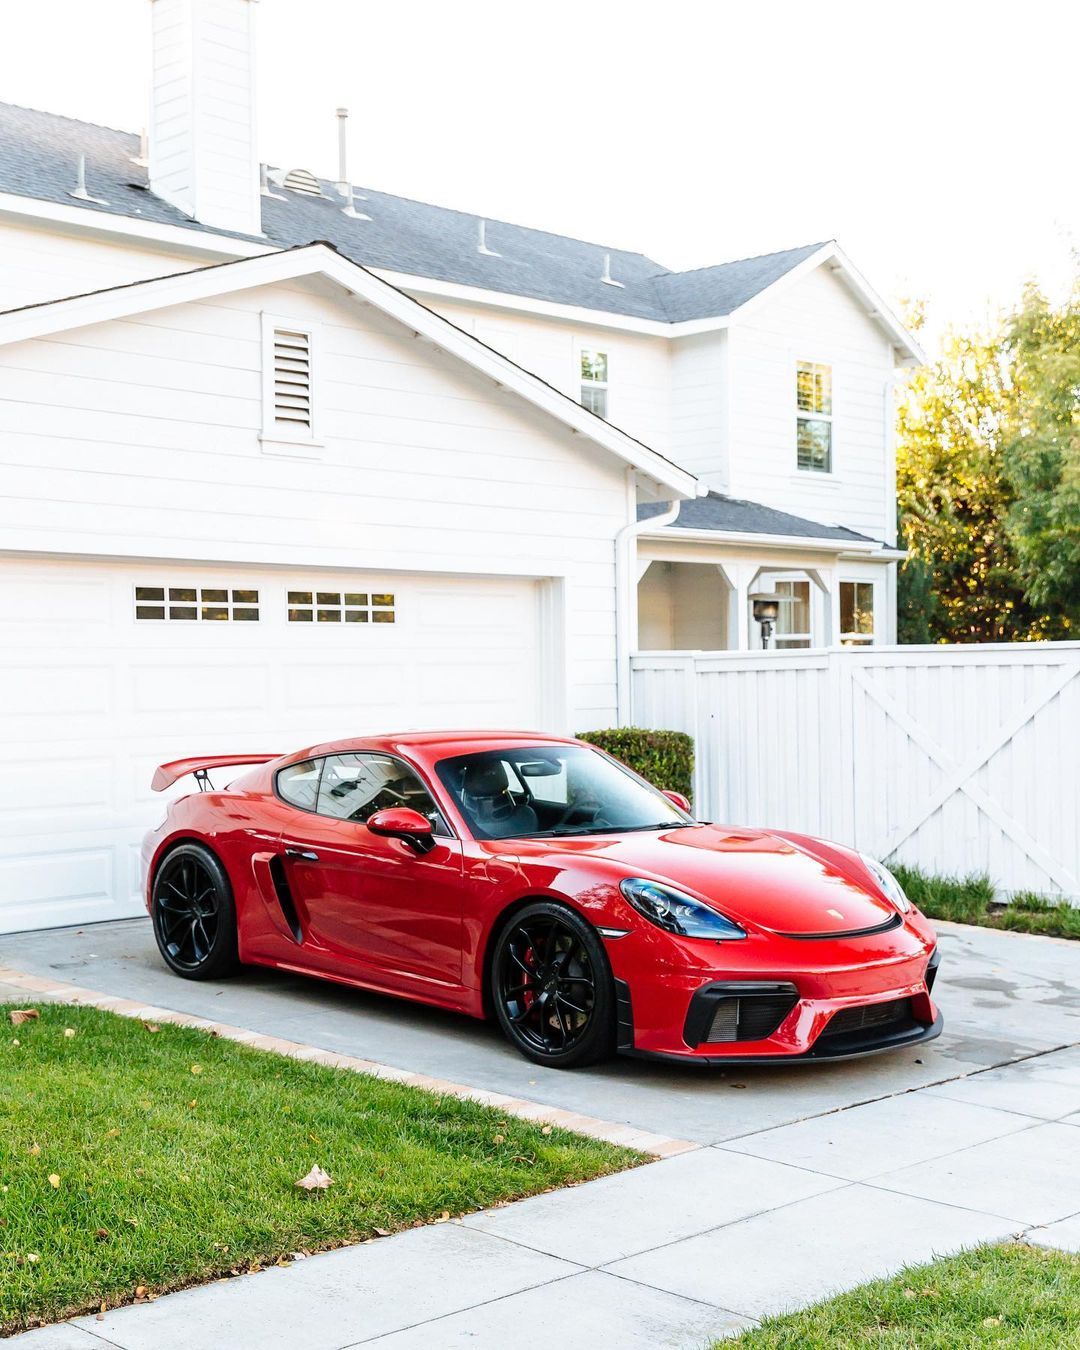 Red Porsche GT4 parked in driveway of suburban home